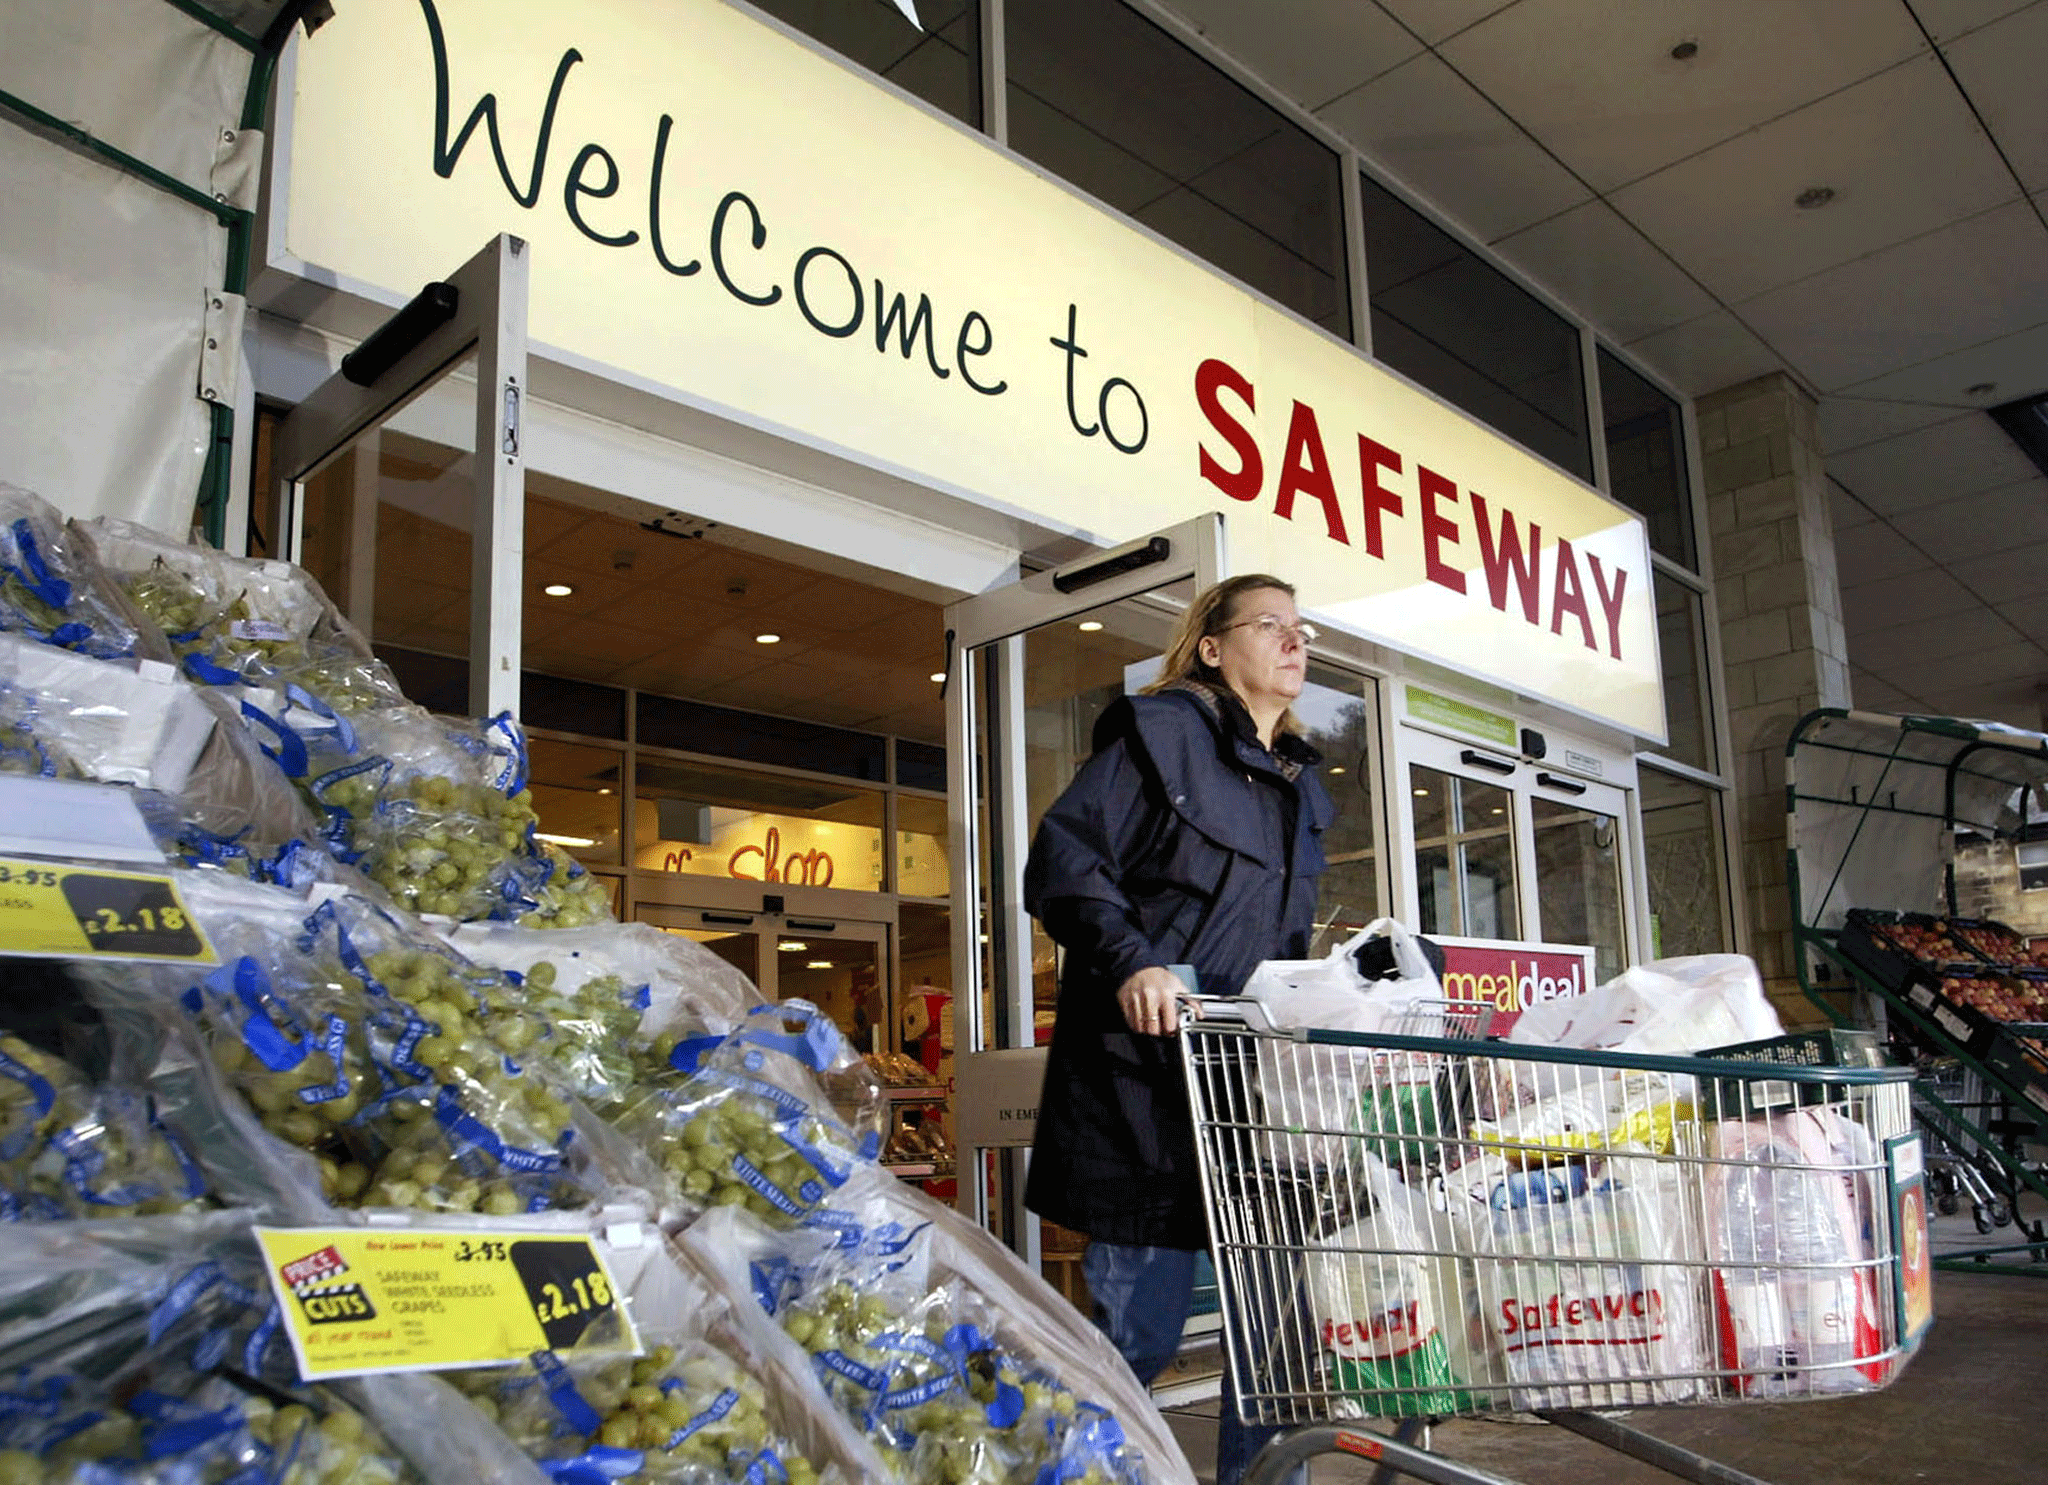 The Safeway brand could be about to make a surprise return after more than a decade